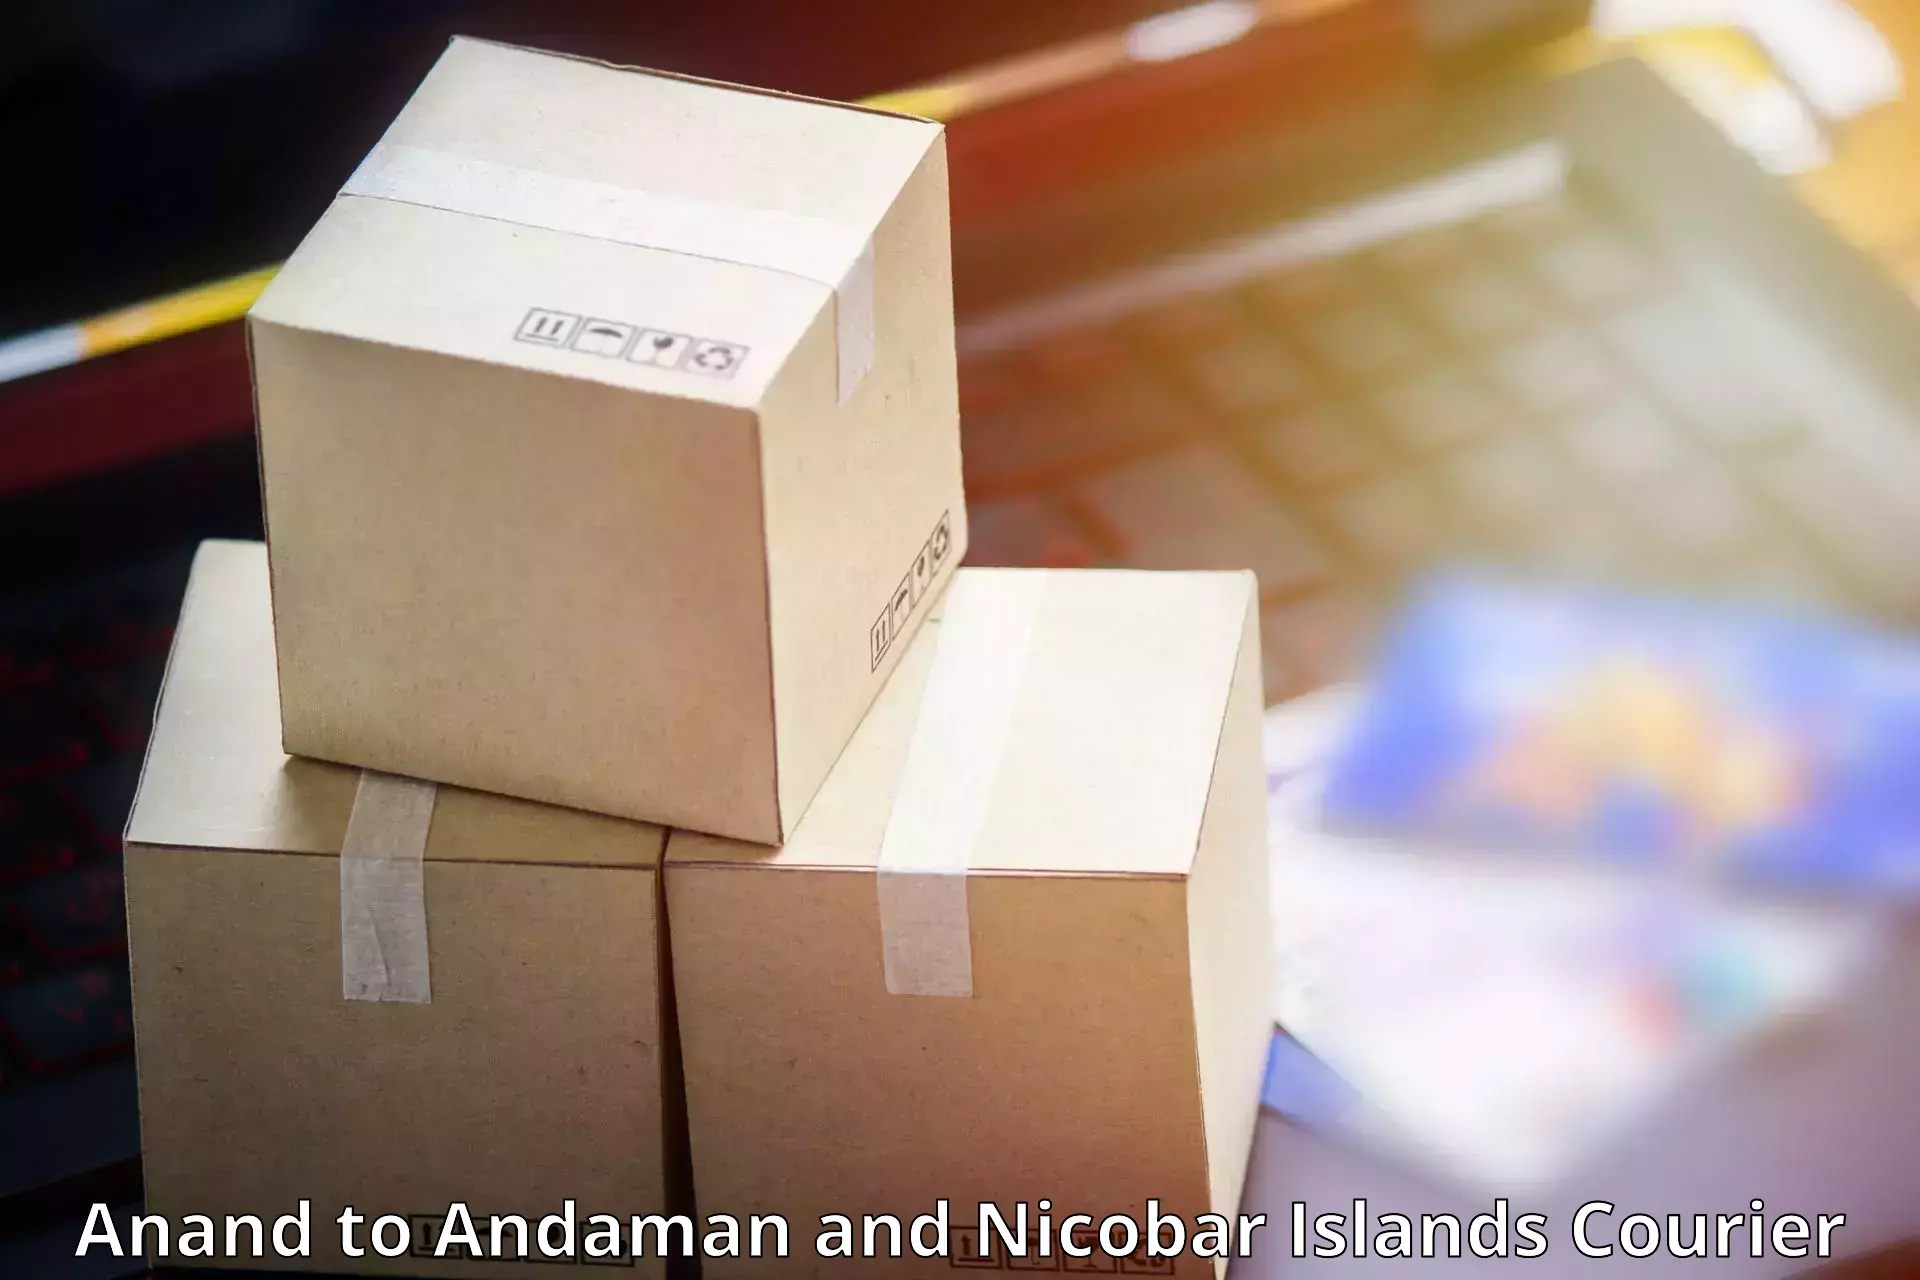 International courier networks Anand to Andaman and Nicobar Islands